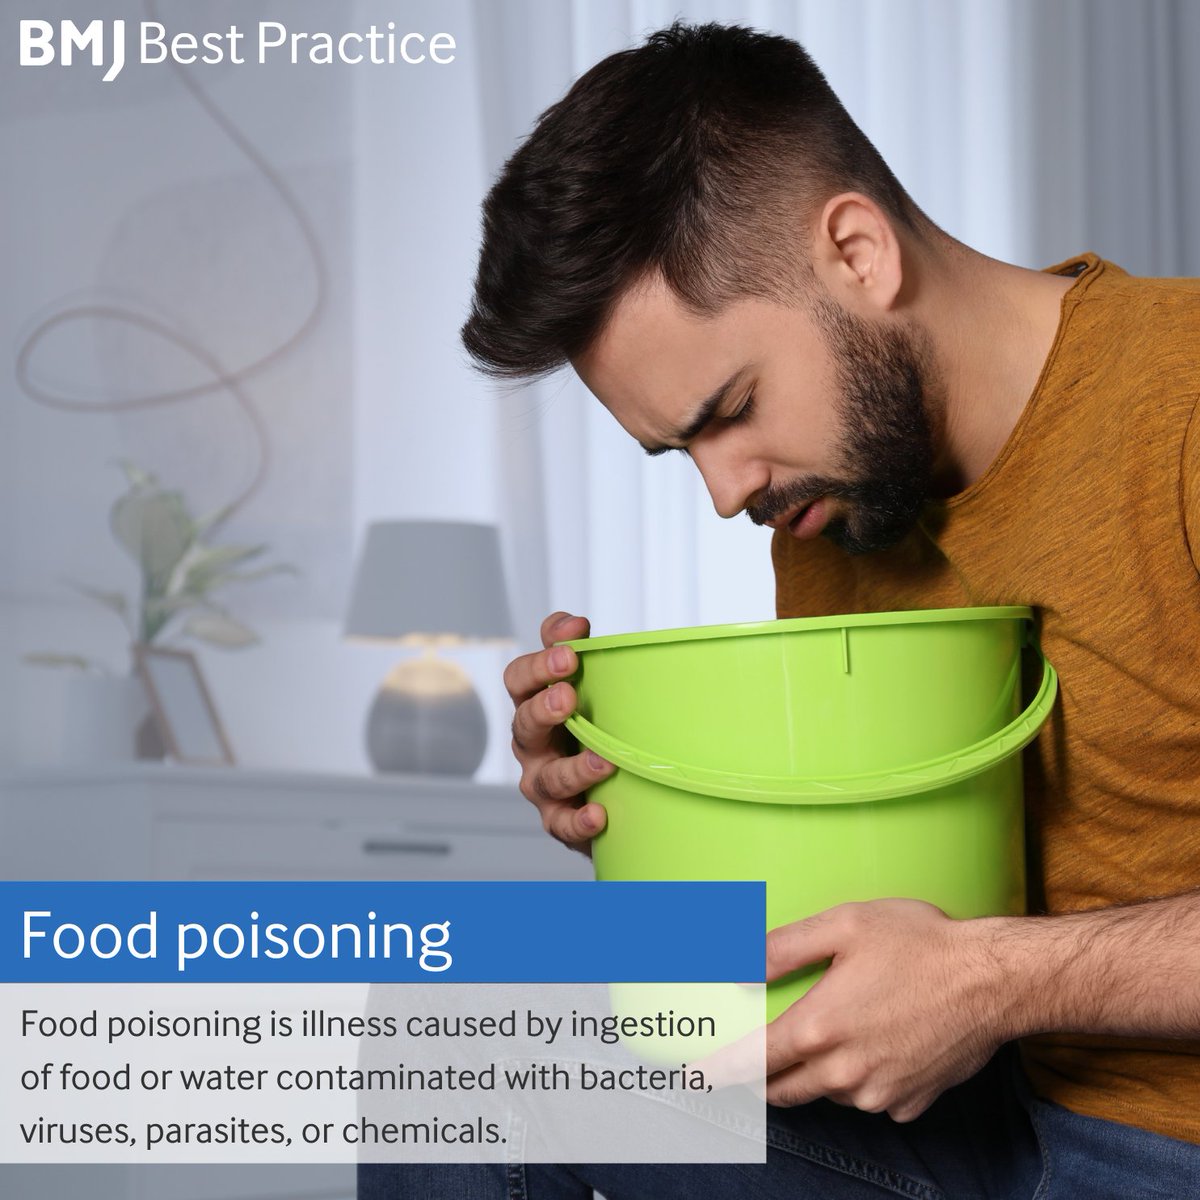 🤢🍔 Food poisoning is often mild & self-limiting, improving with supportive care 💙 Symptoms like abdominal pain, nausea, vomiting, & diarrhea are common. Most treatment involves staying hydrated & managing symptoms like nausea 💧 Learn more here: bit.ly/3J87jlg